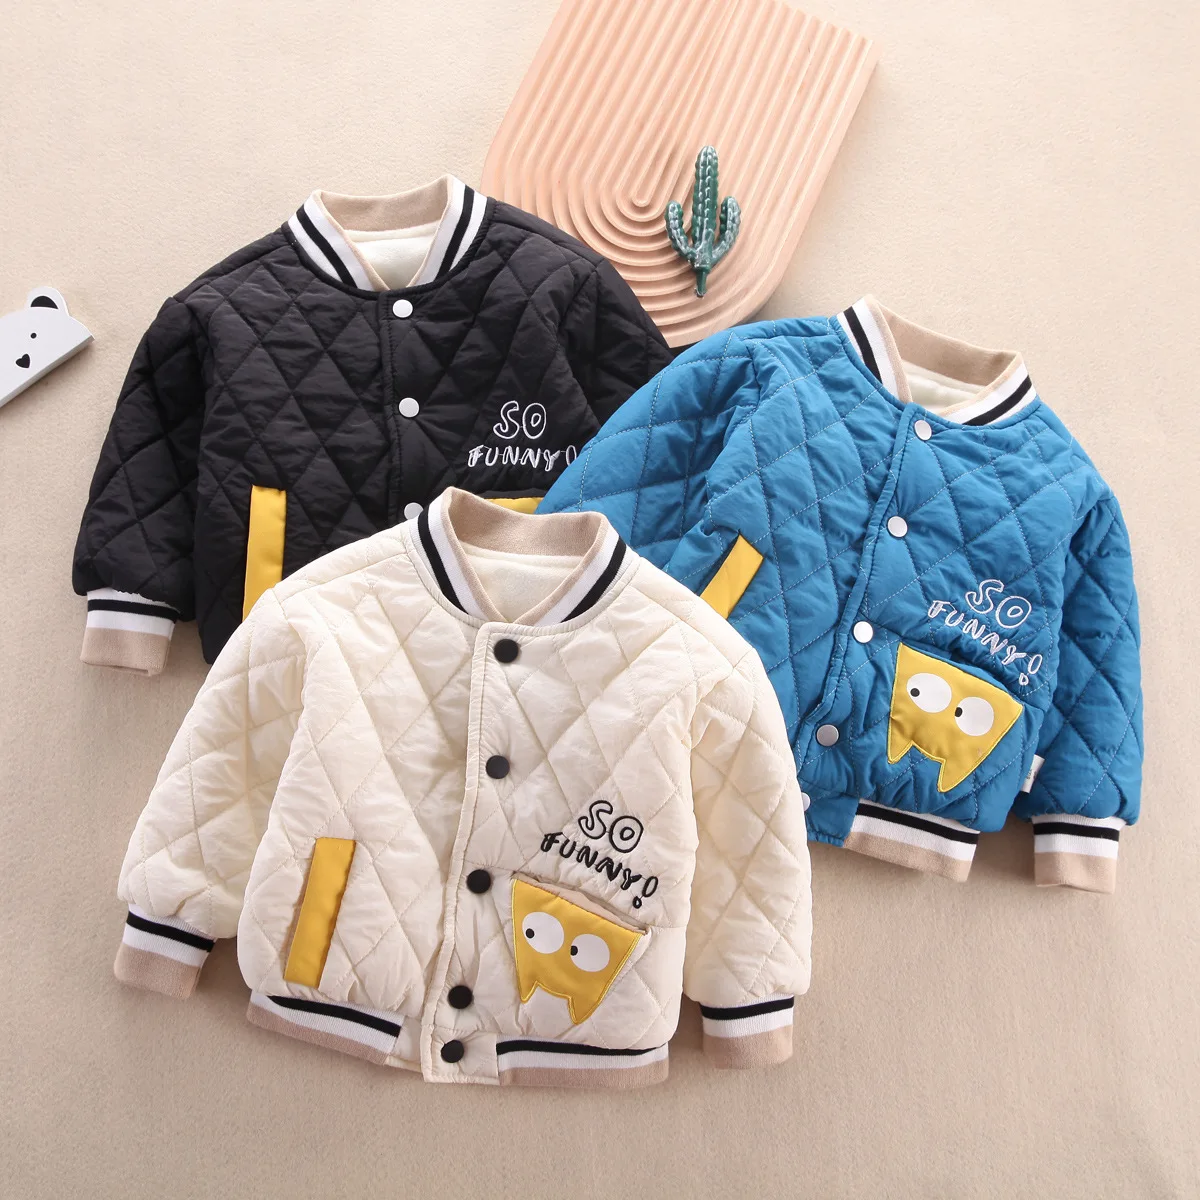 Baby Boys Girls Jacket Cotton Padded Coat Winter Thicken Warm Children Letter Color Matching Baseball Uniform Clothing Outwear